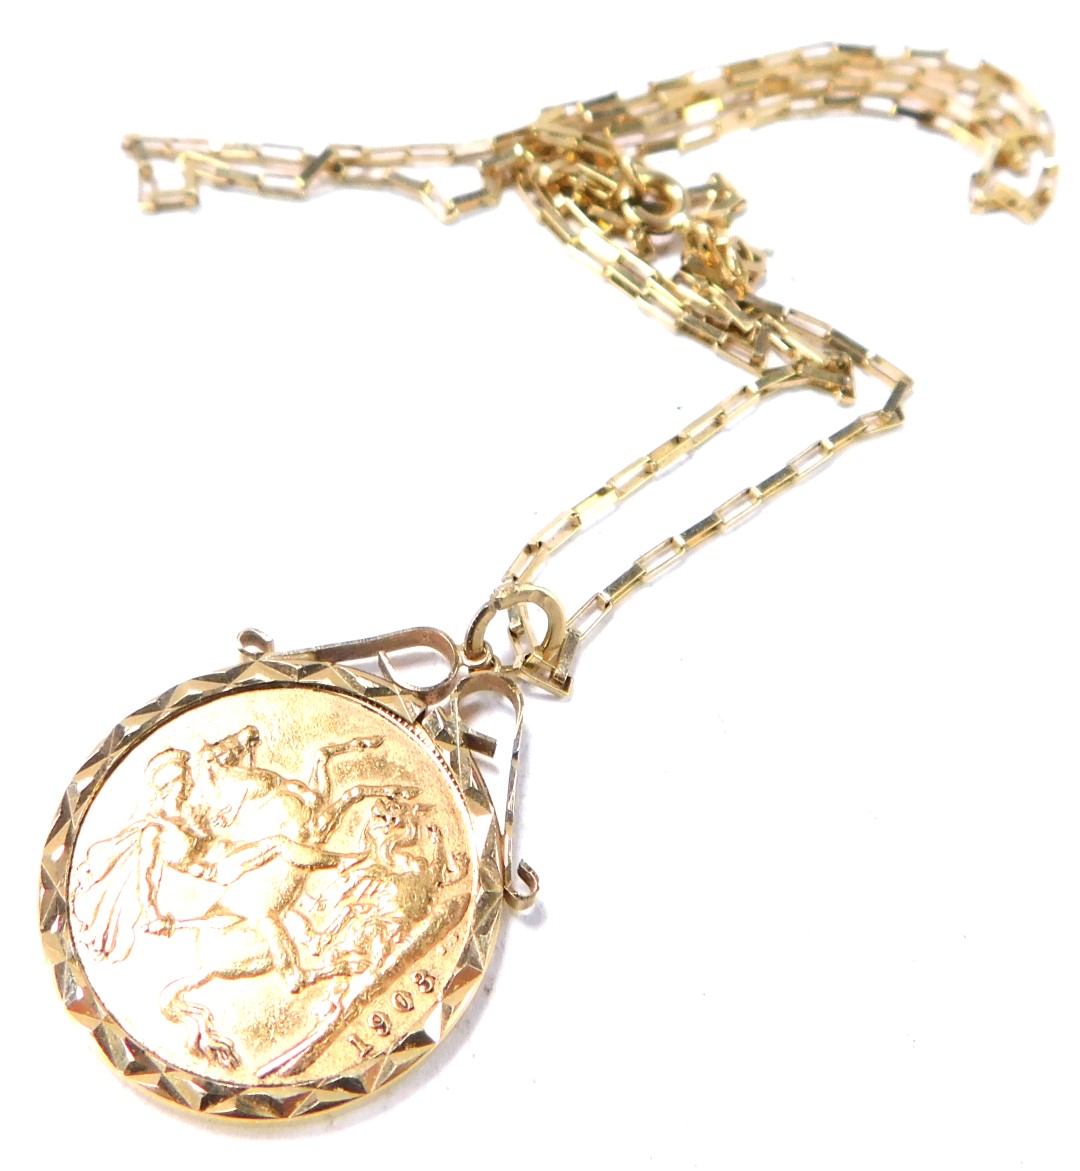 An Edward VII full gold sovereign pendant and chain, dated 1903, in a 9ct gold frame, with 9ct